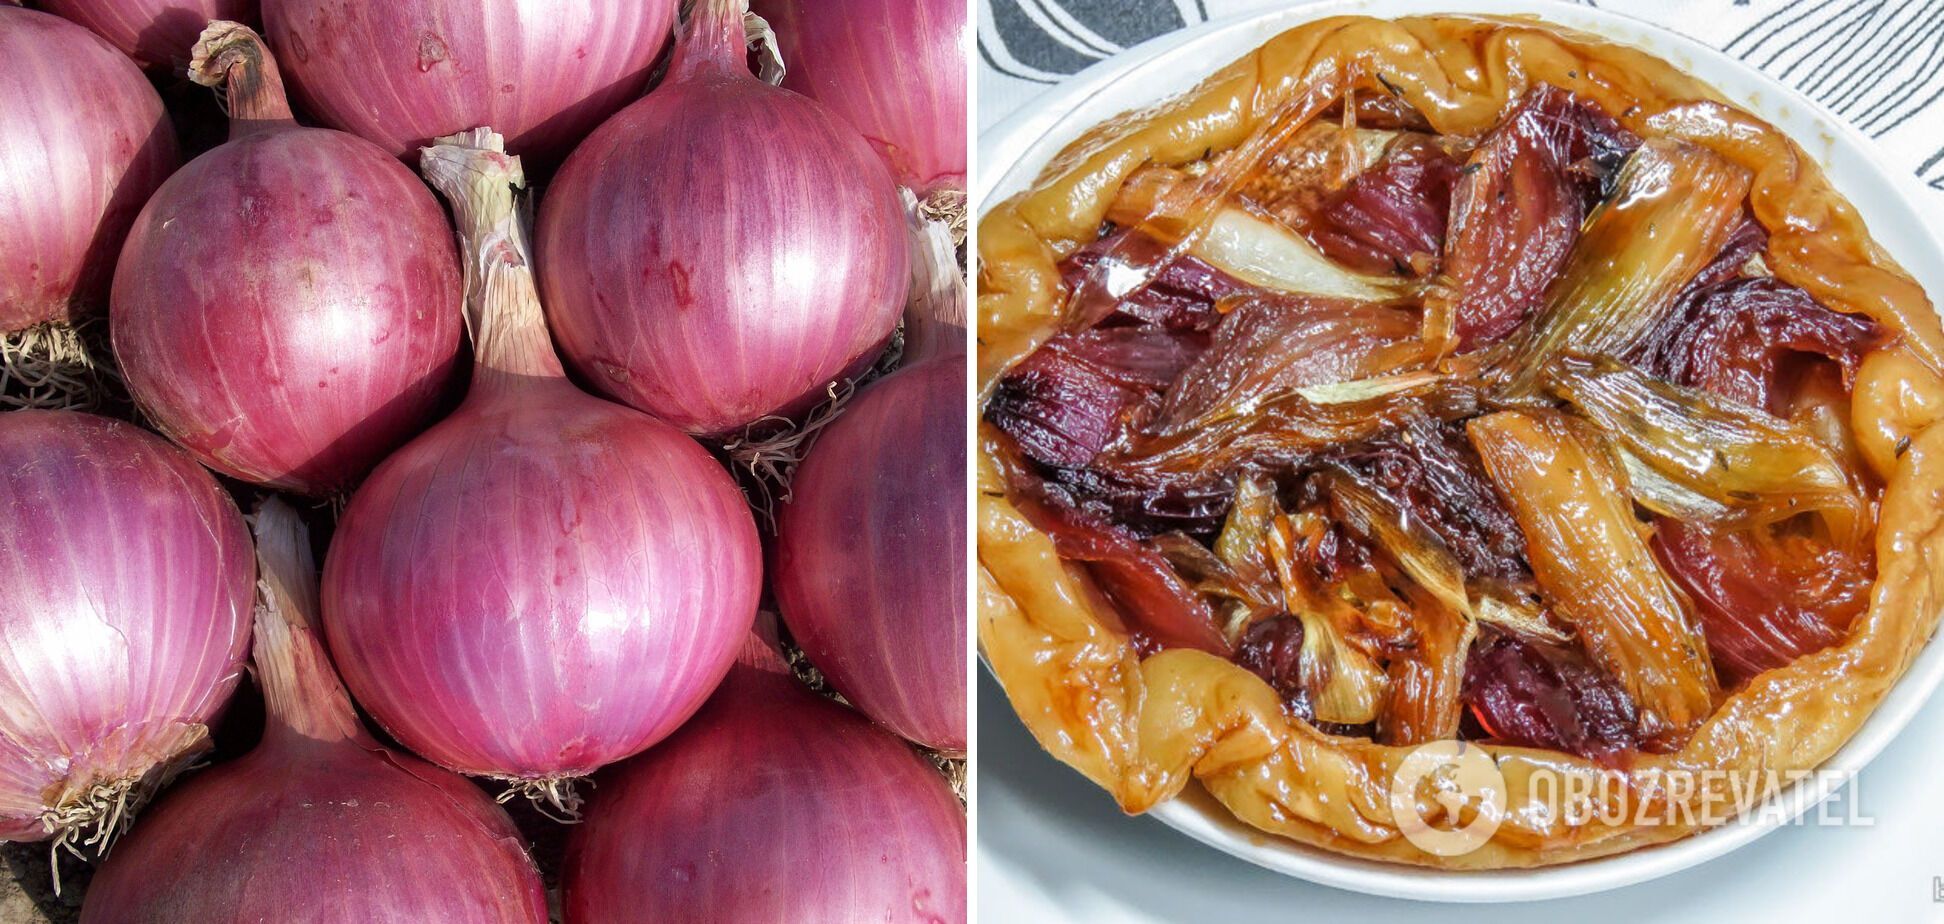 Onion dishes